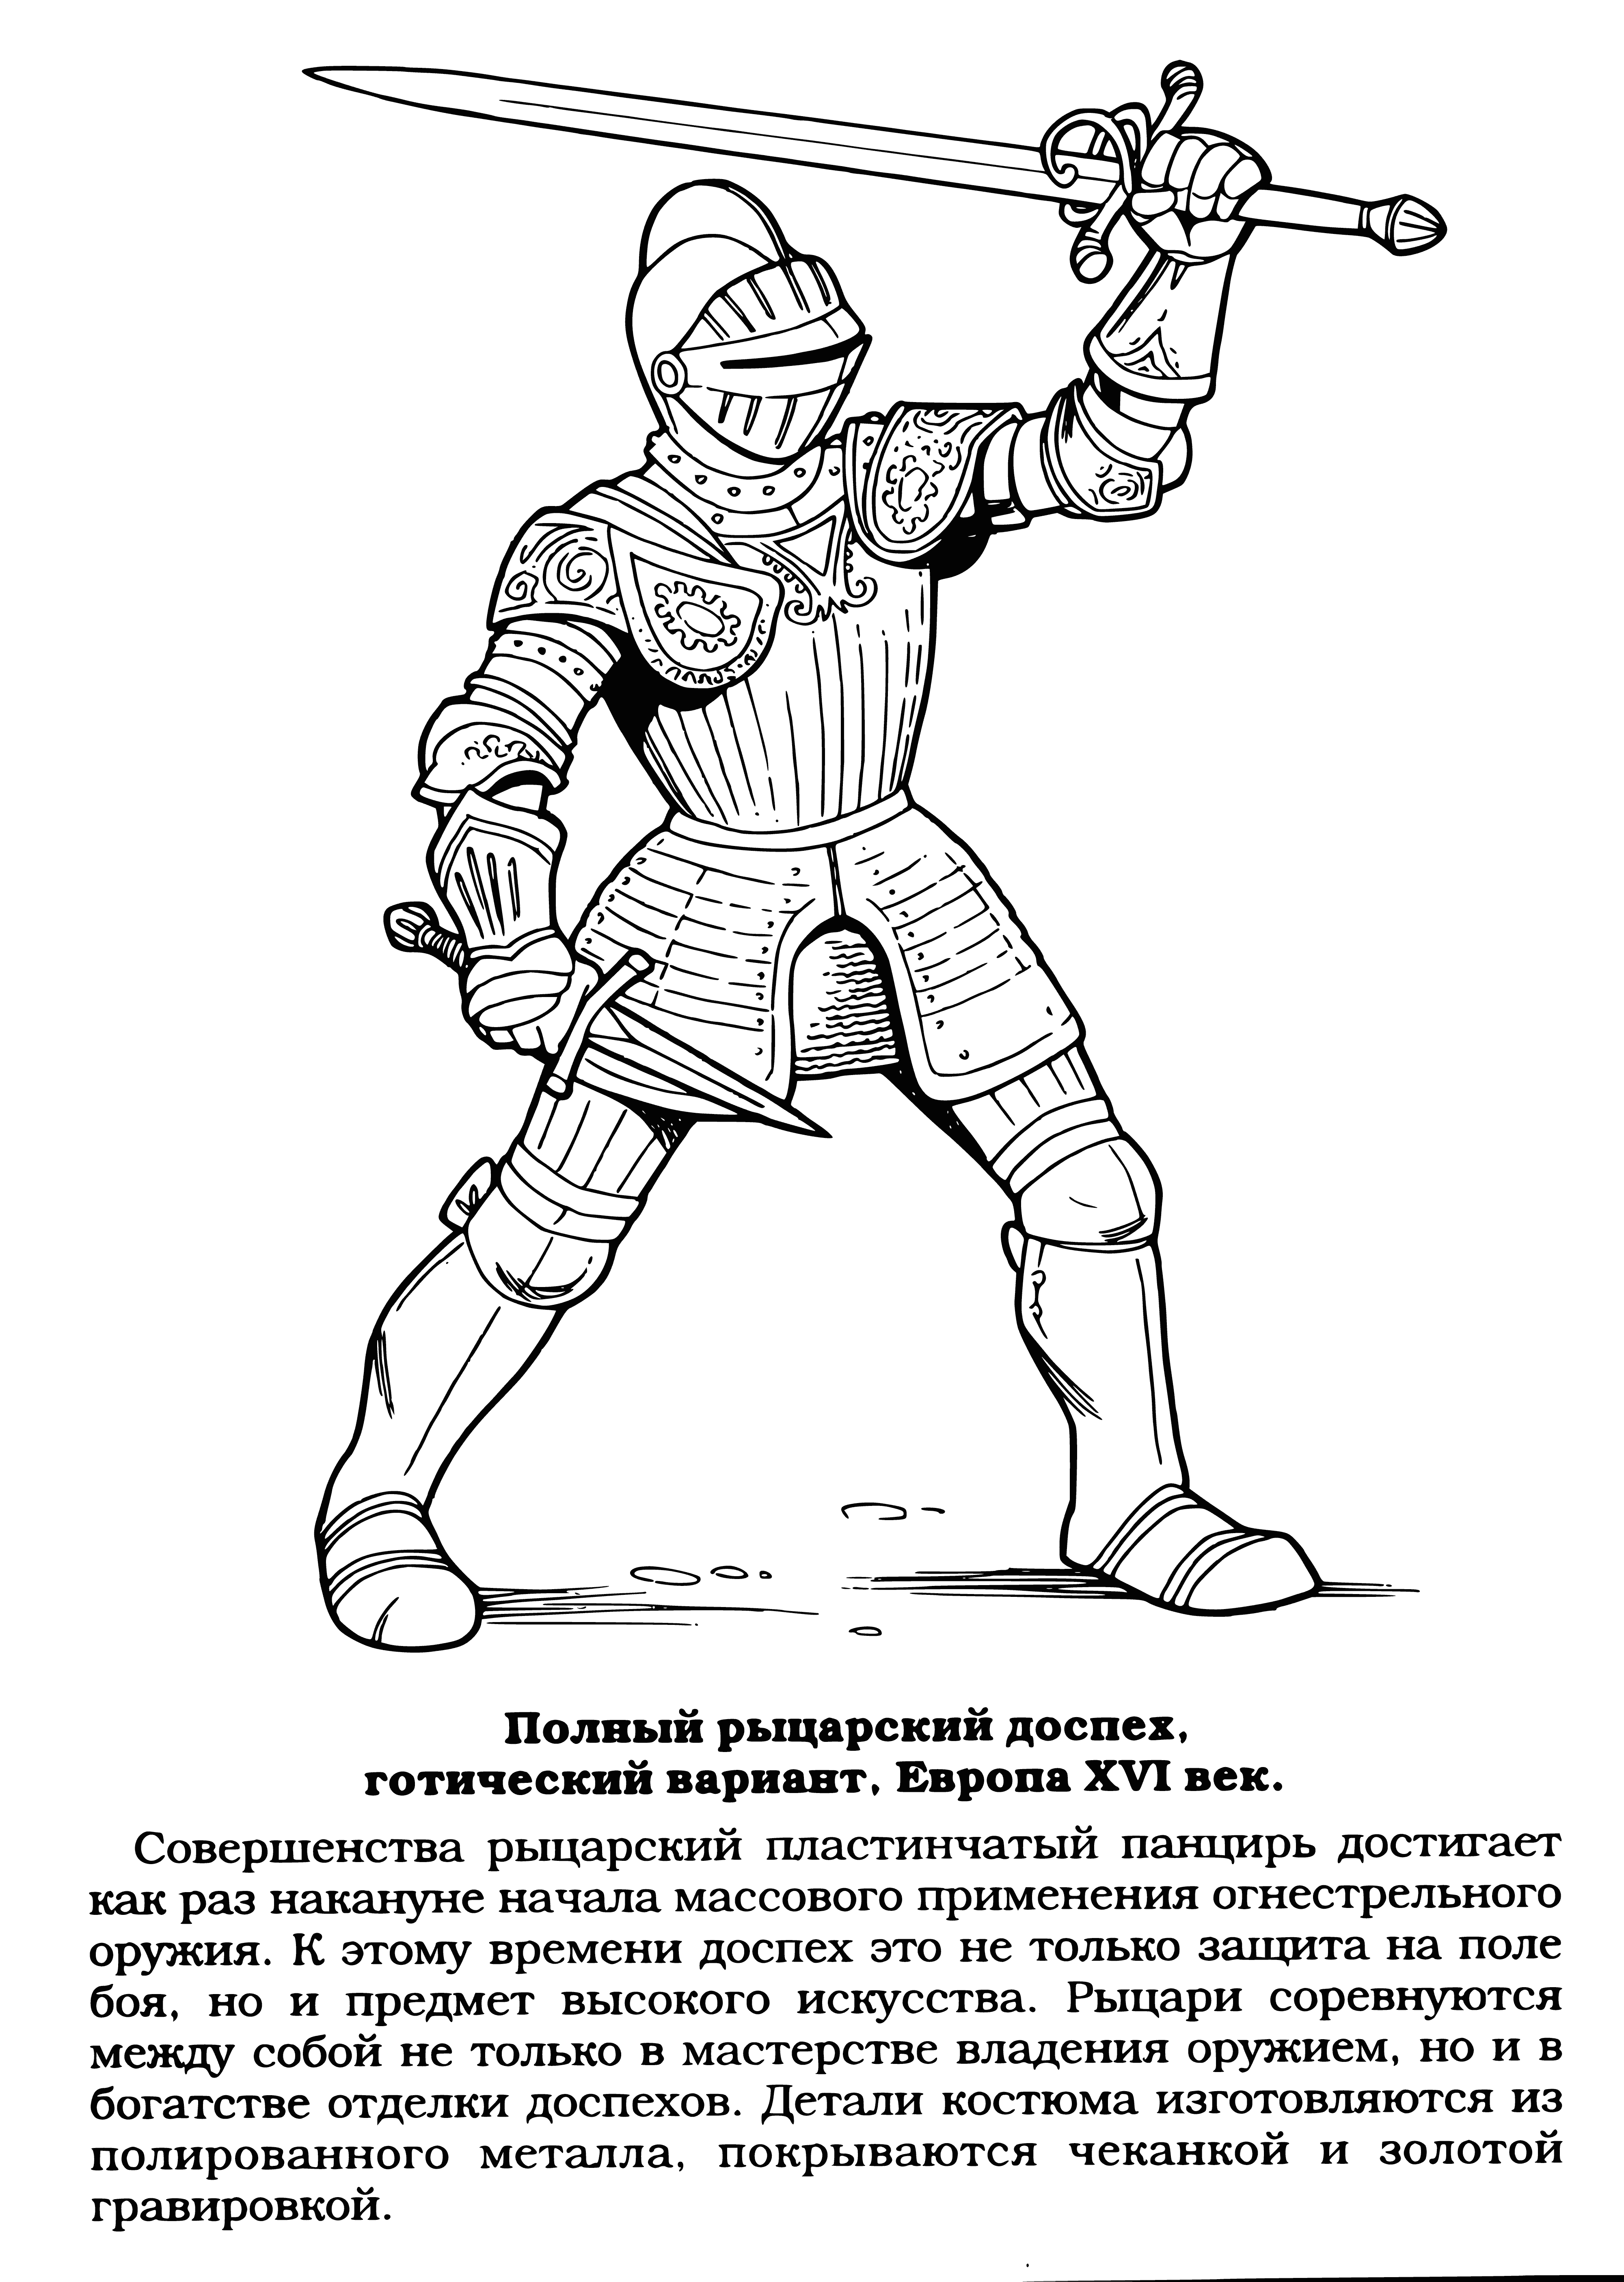 coloring page: A knight in armor stands ready on a battlefield, wearing helmet and armor, shield and sword in hand.